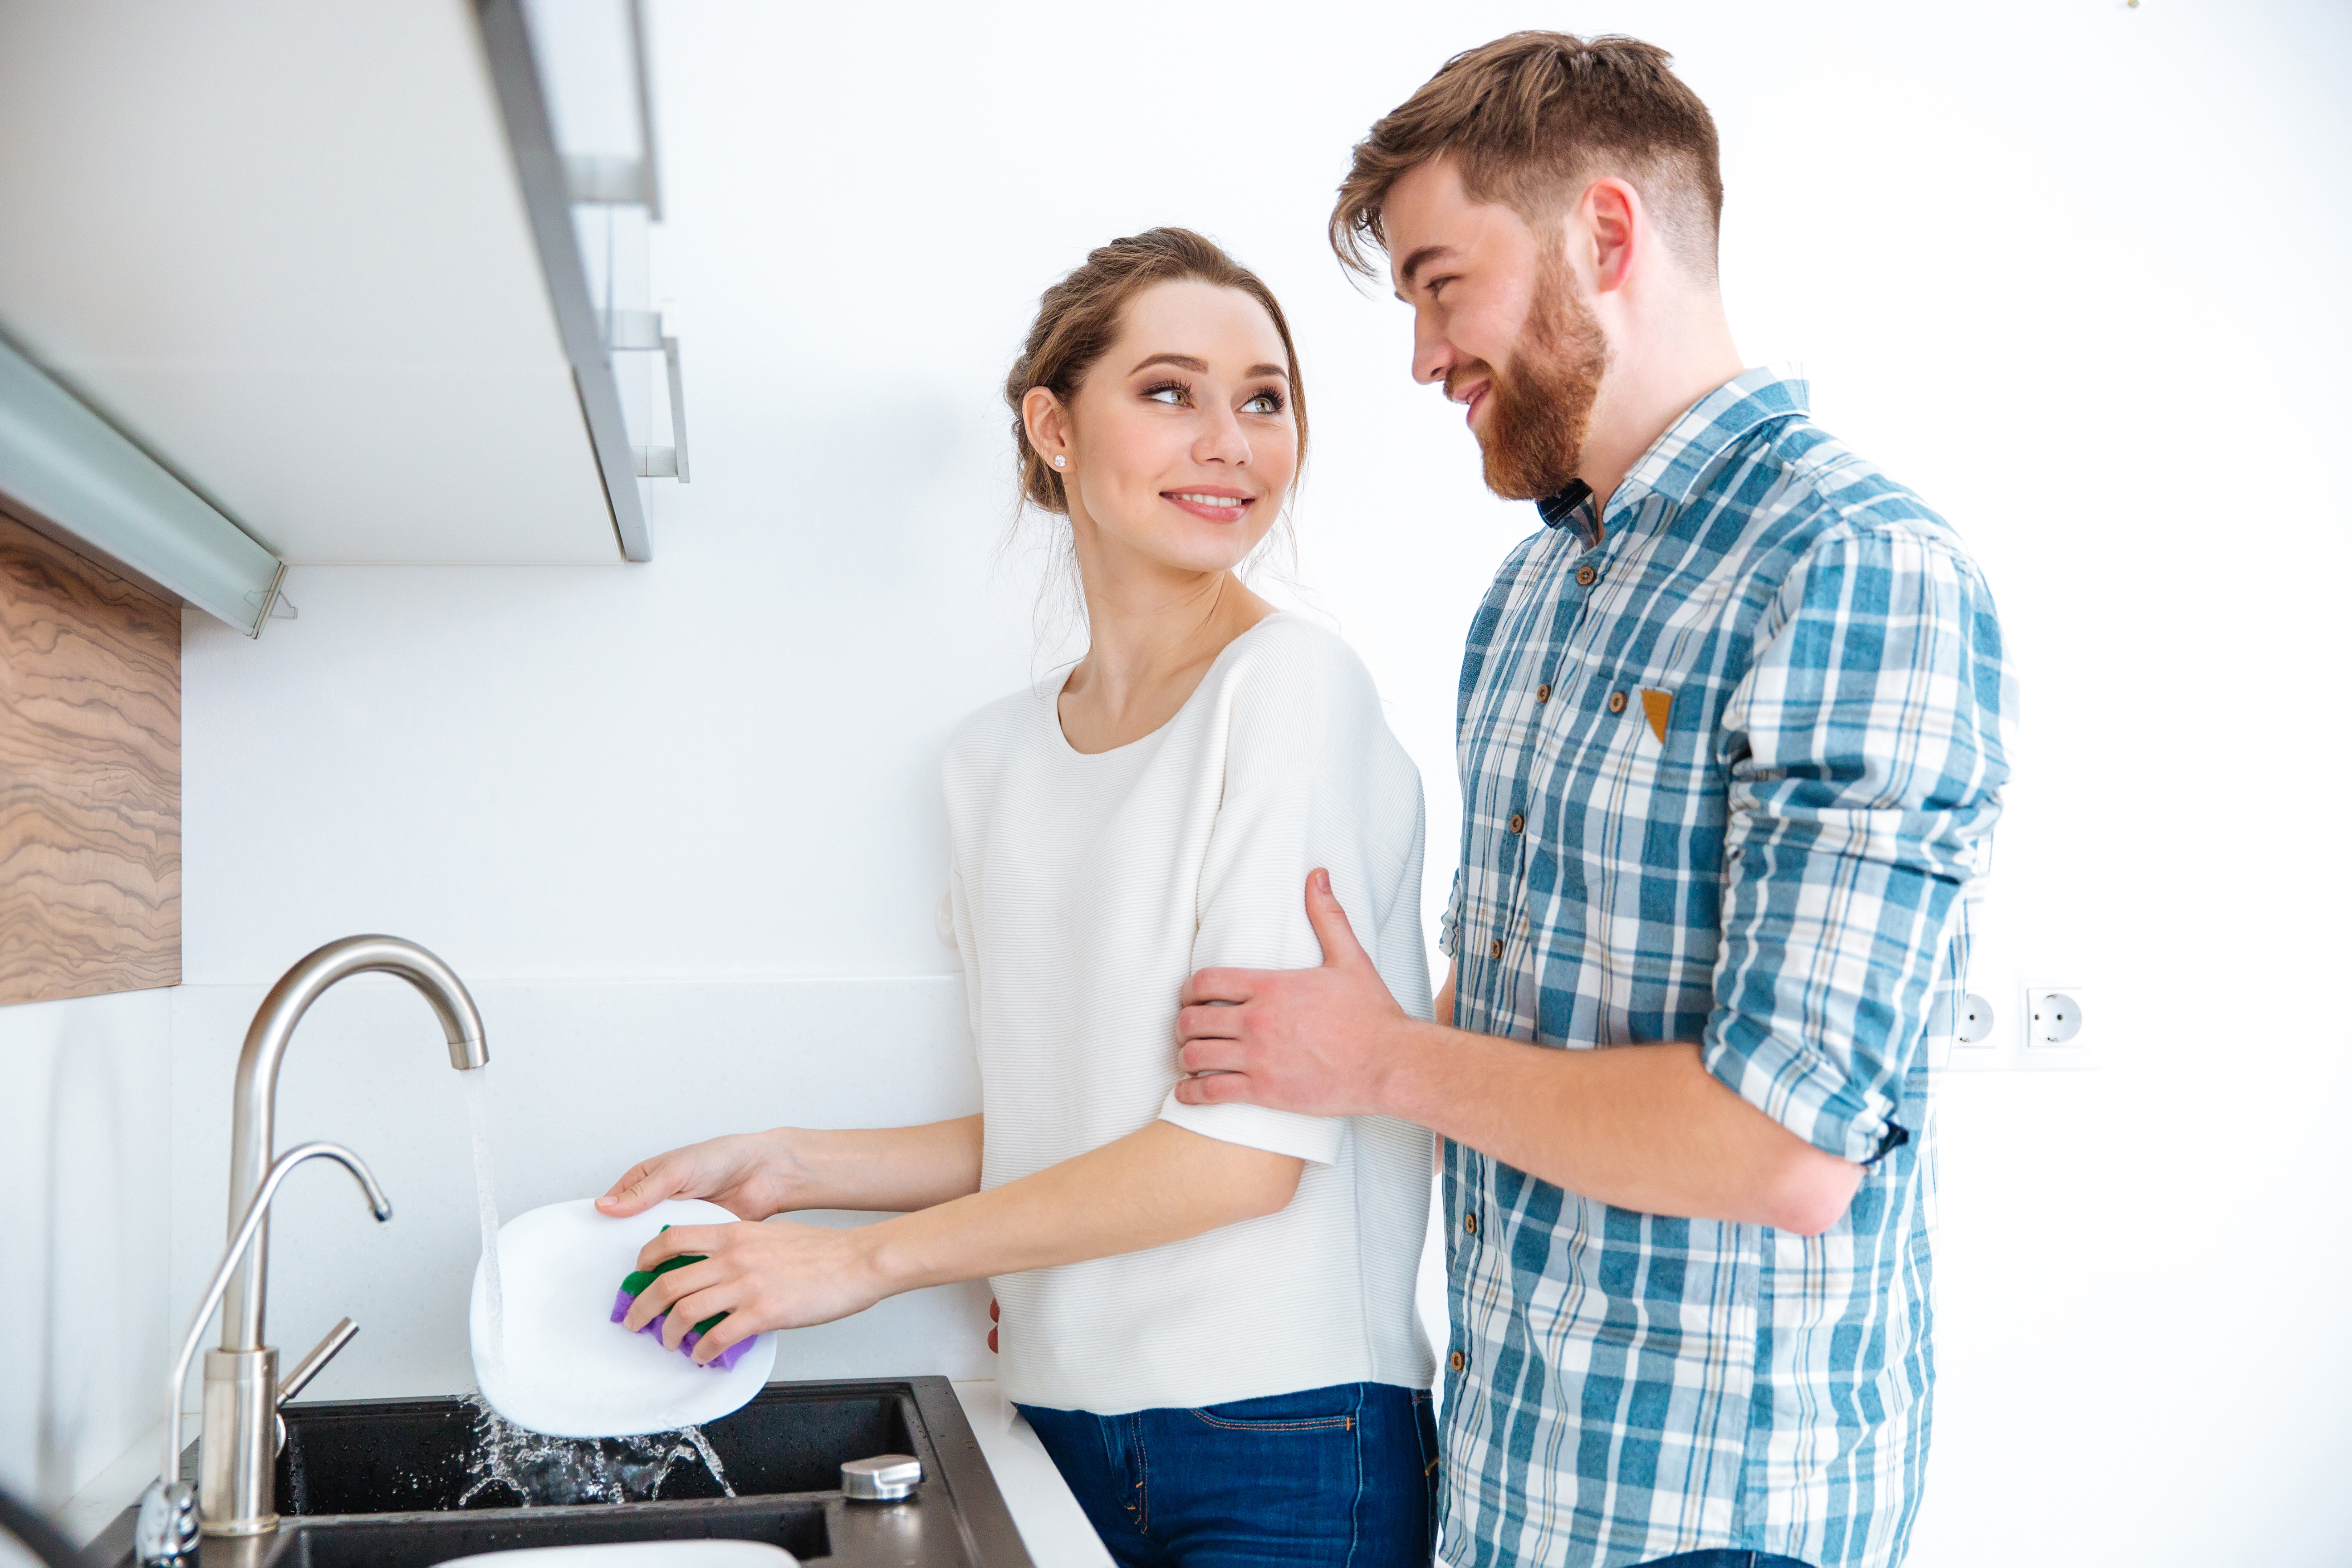 Husband helping wife do dishes in the kitchen | Source: Shutterstock